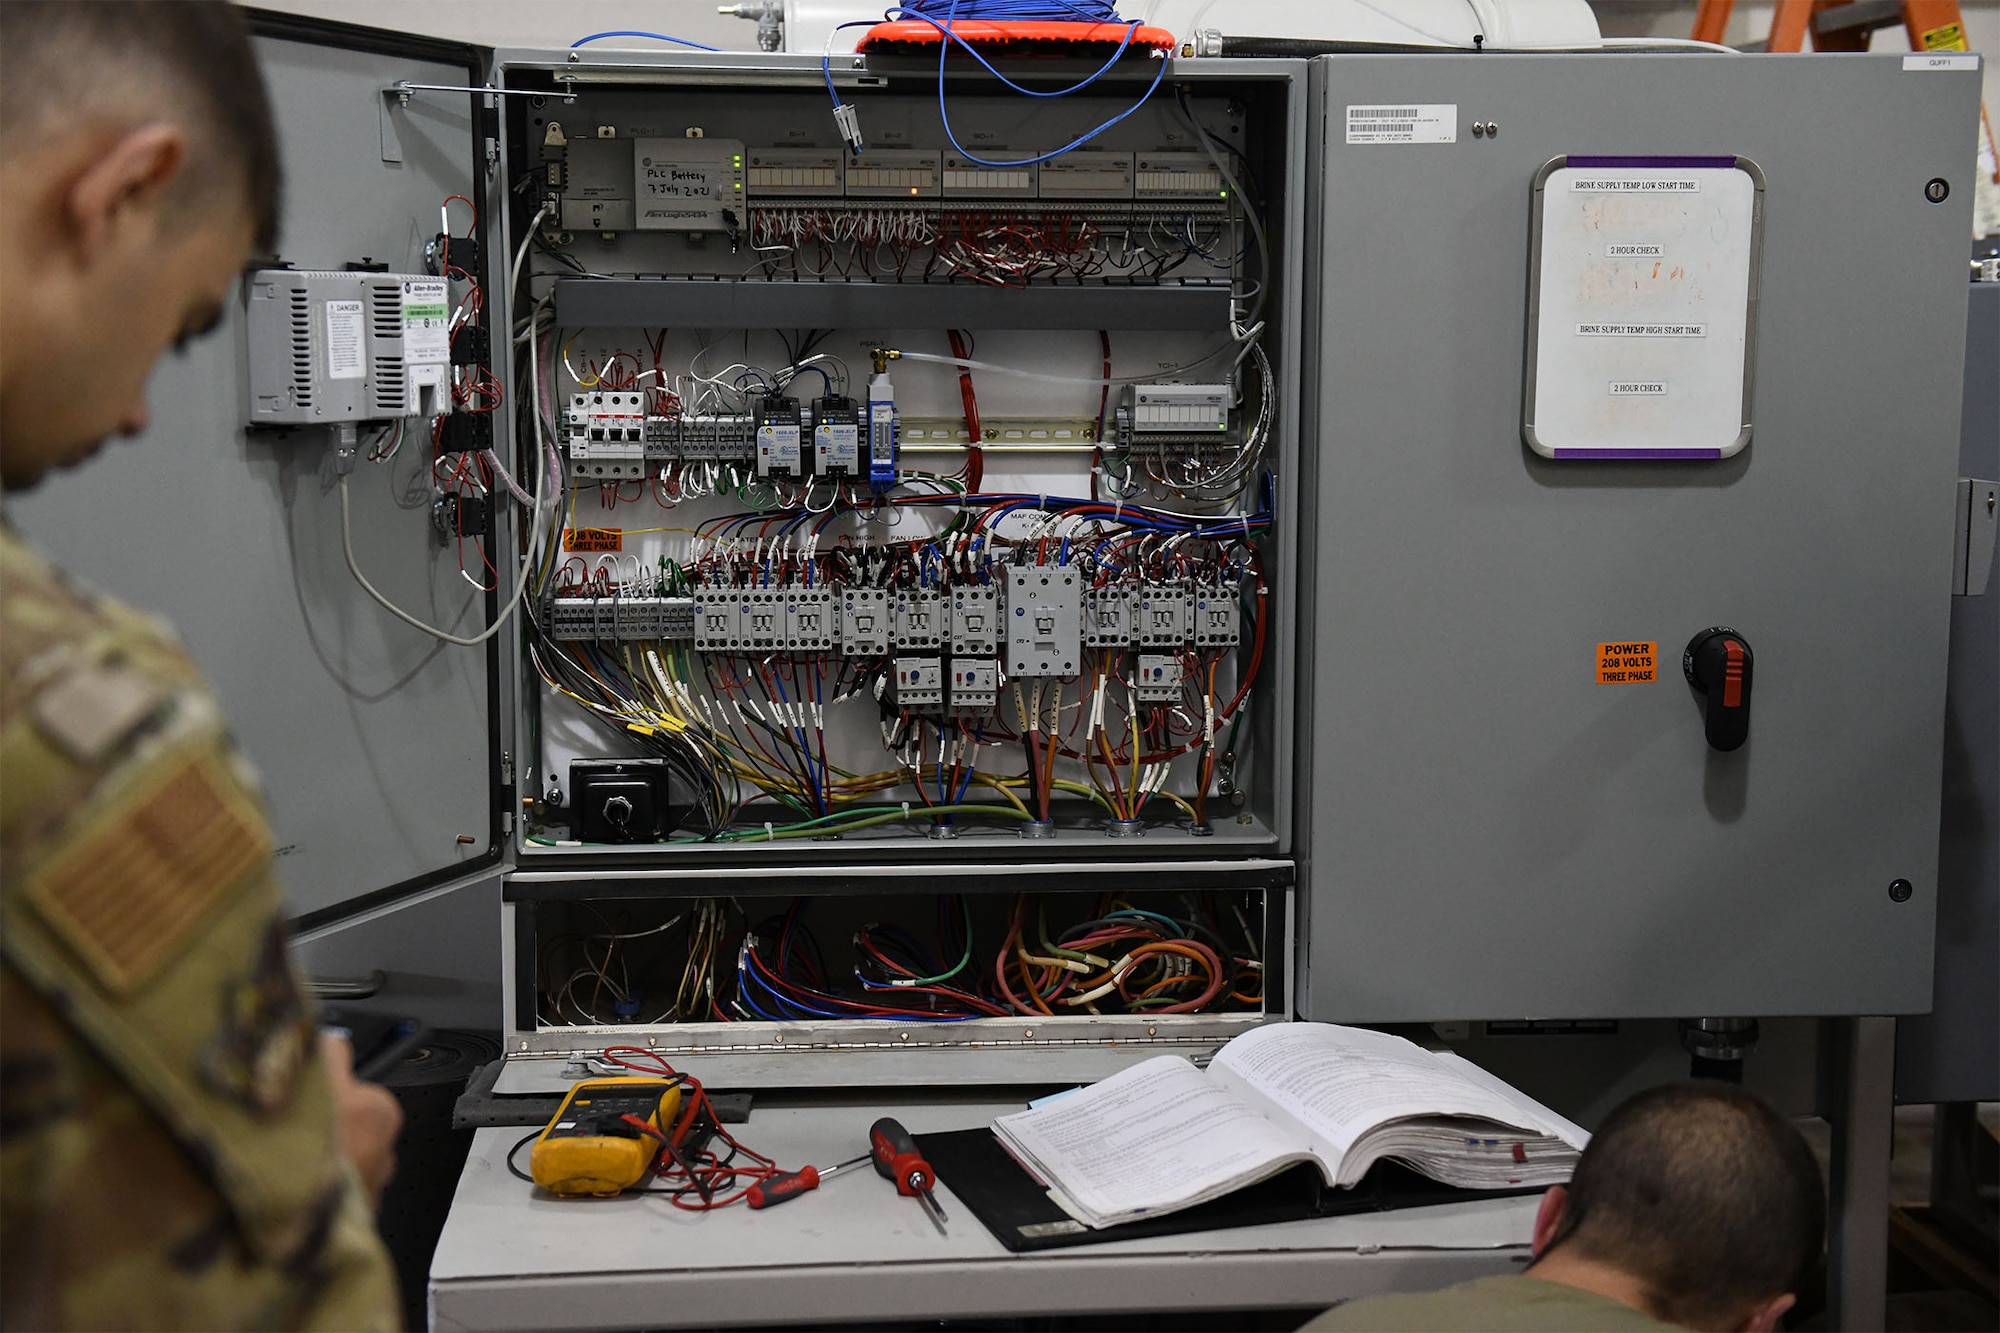 The electrical components of missile alert facility chiller are shown, which the power, refrigeration and electrical laboratory team participating in the 2021 Global Strike Challenge was tasked to repair July 26, 2021 at Malmstrom Air Force Base, Mont. PREL is a facilities maintenance career field, which is a branch of missile maintenance that specializes in electrical and refrigeration troubleshooting and repair. (U.S. Air Force photo by Airman Elijah Van Zandt)